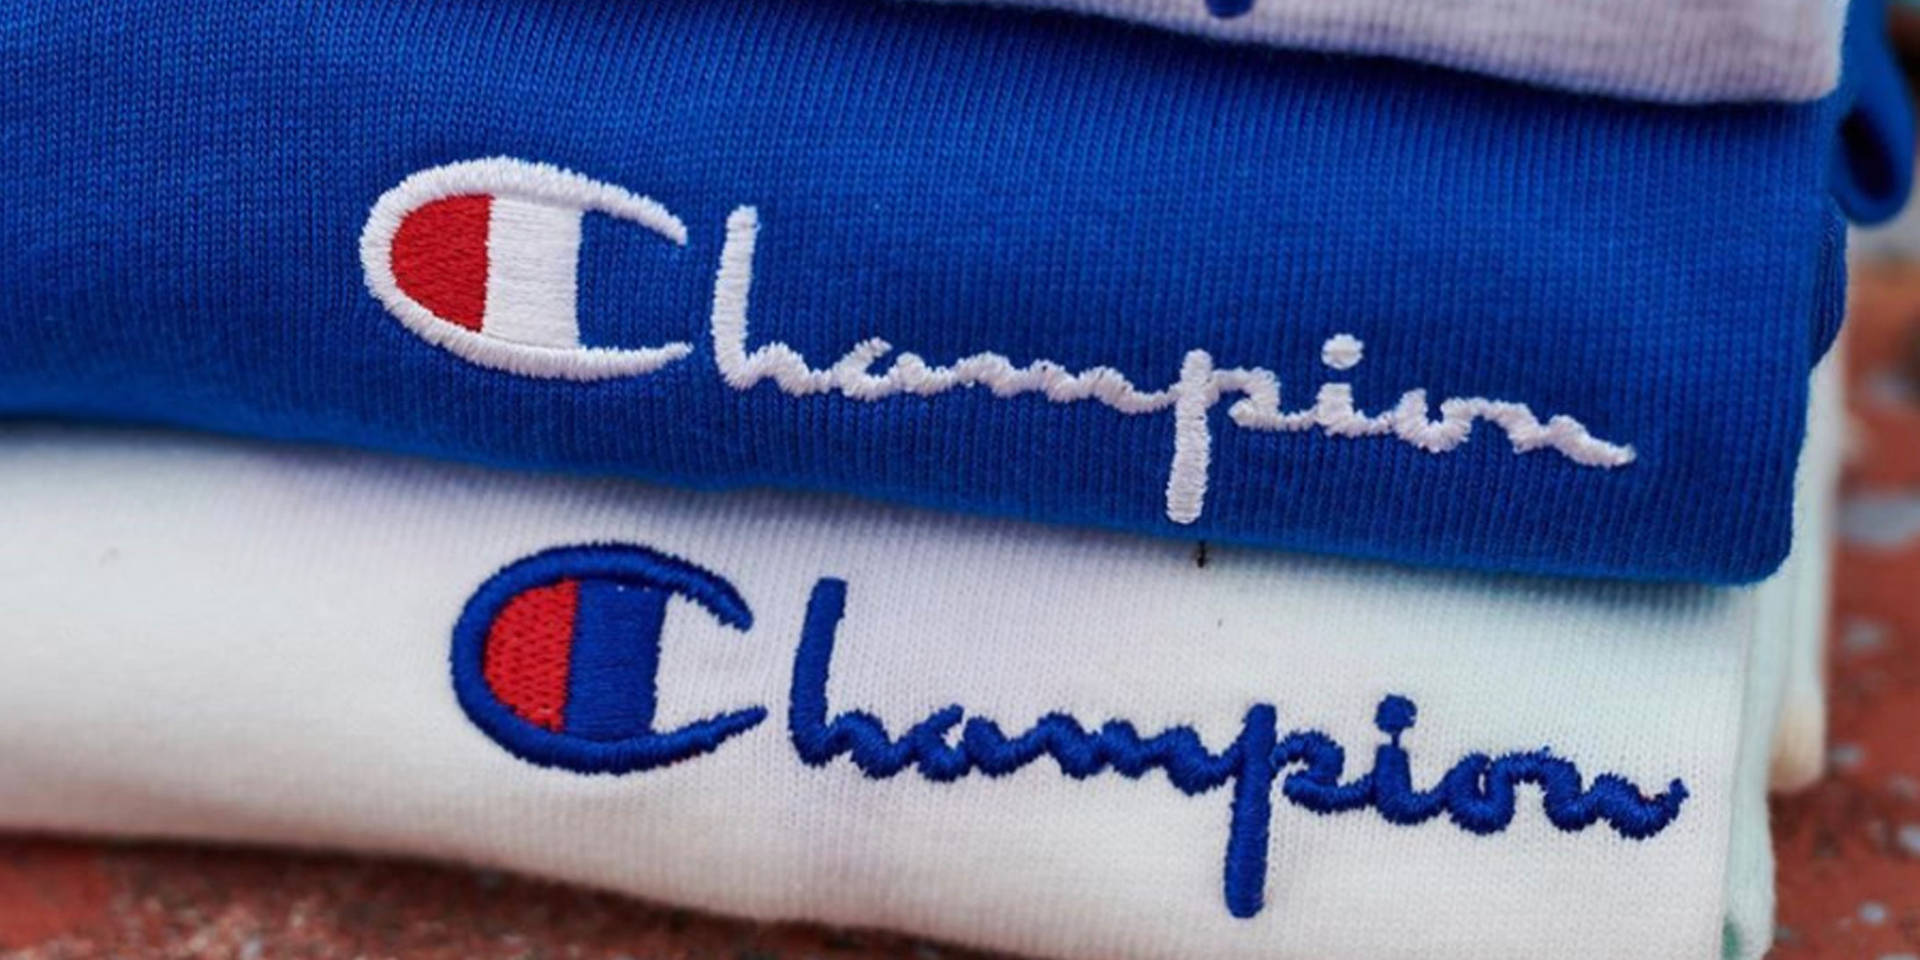 Champion Stacked Clothes